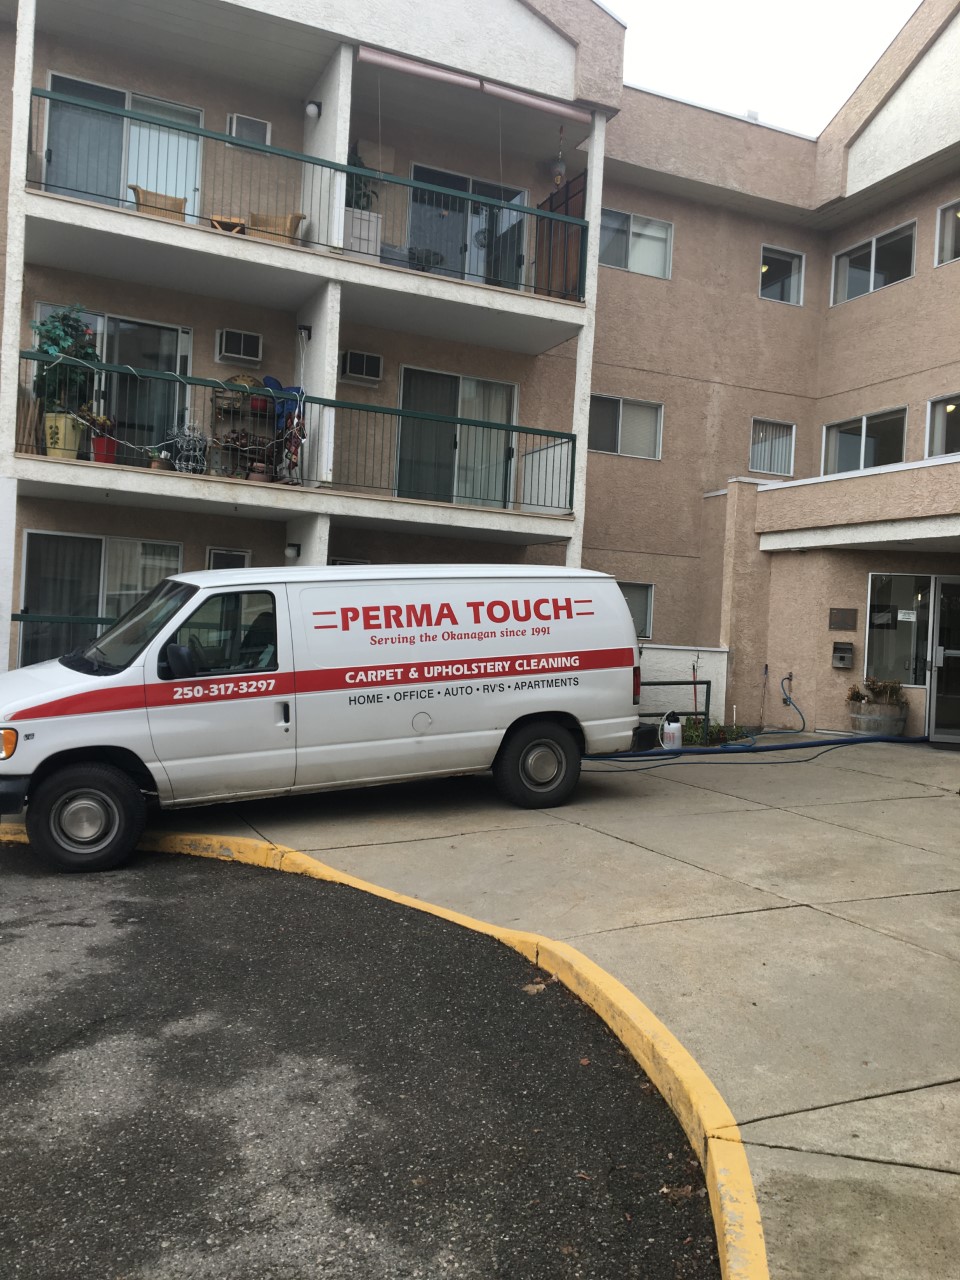 Perma Touch Carpet Care